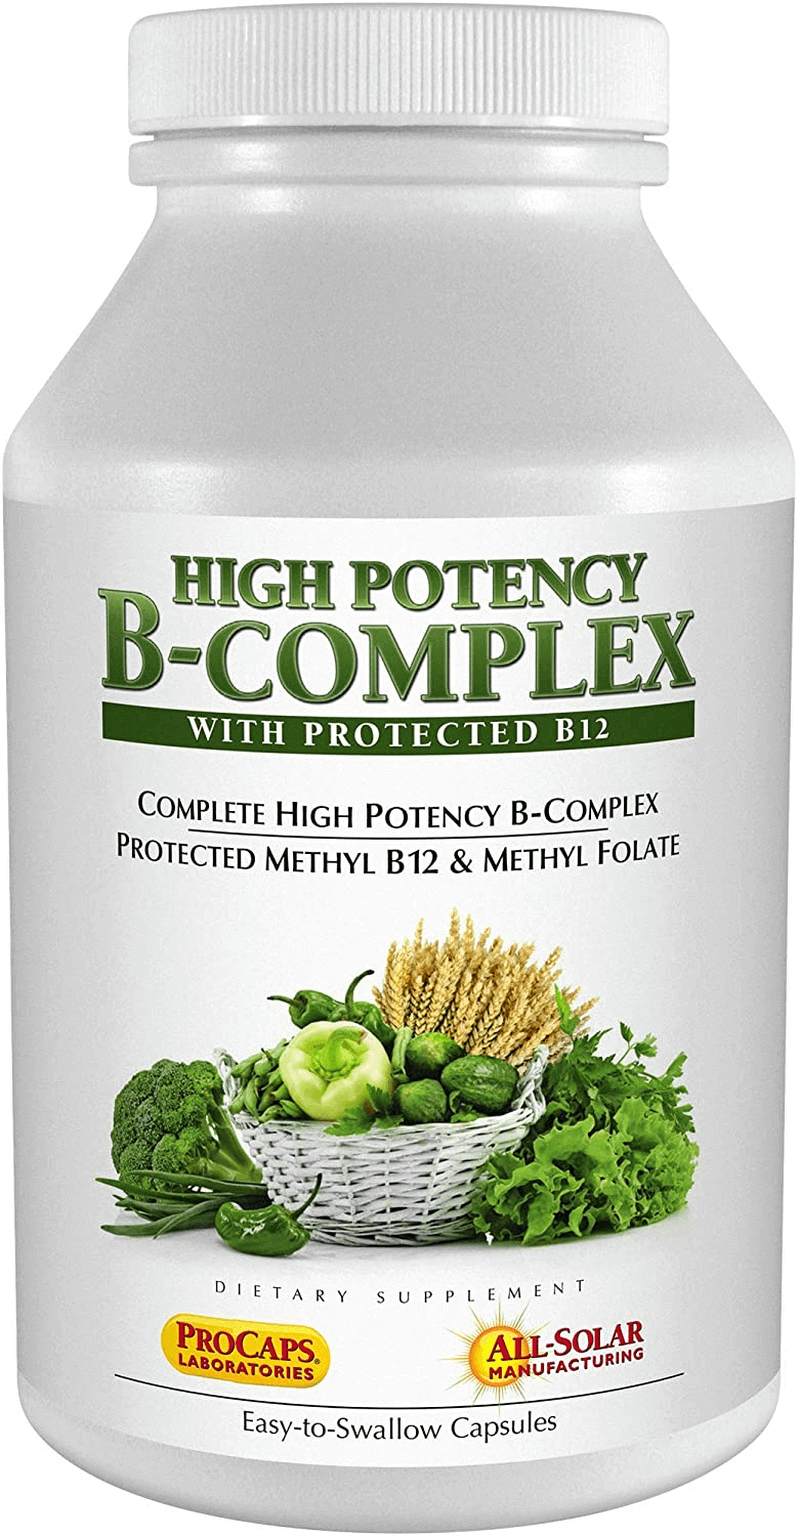 Andrew Lessman High Potency B-Complex 360 Capsules - with High Levels of Folate Complex & Biotin, Promotes Cellular Growth, Energy, Immune Function, Detoxification, Fat Metabolism & More - vitamenstore.com